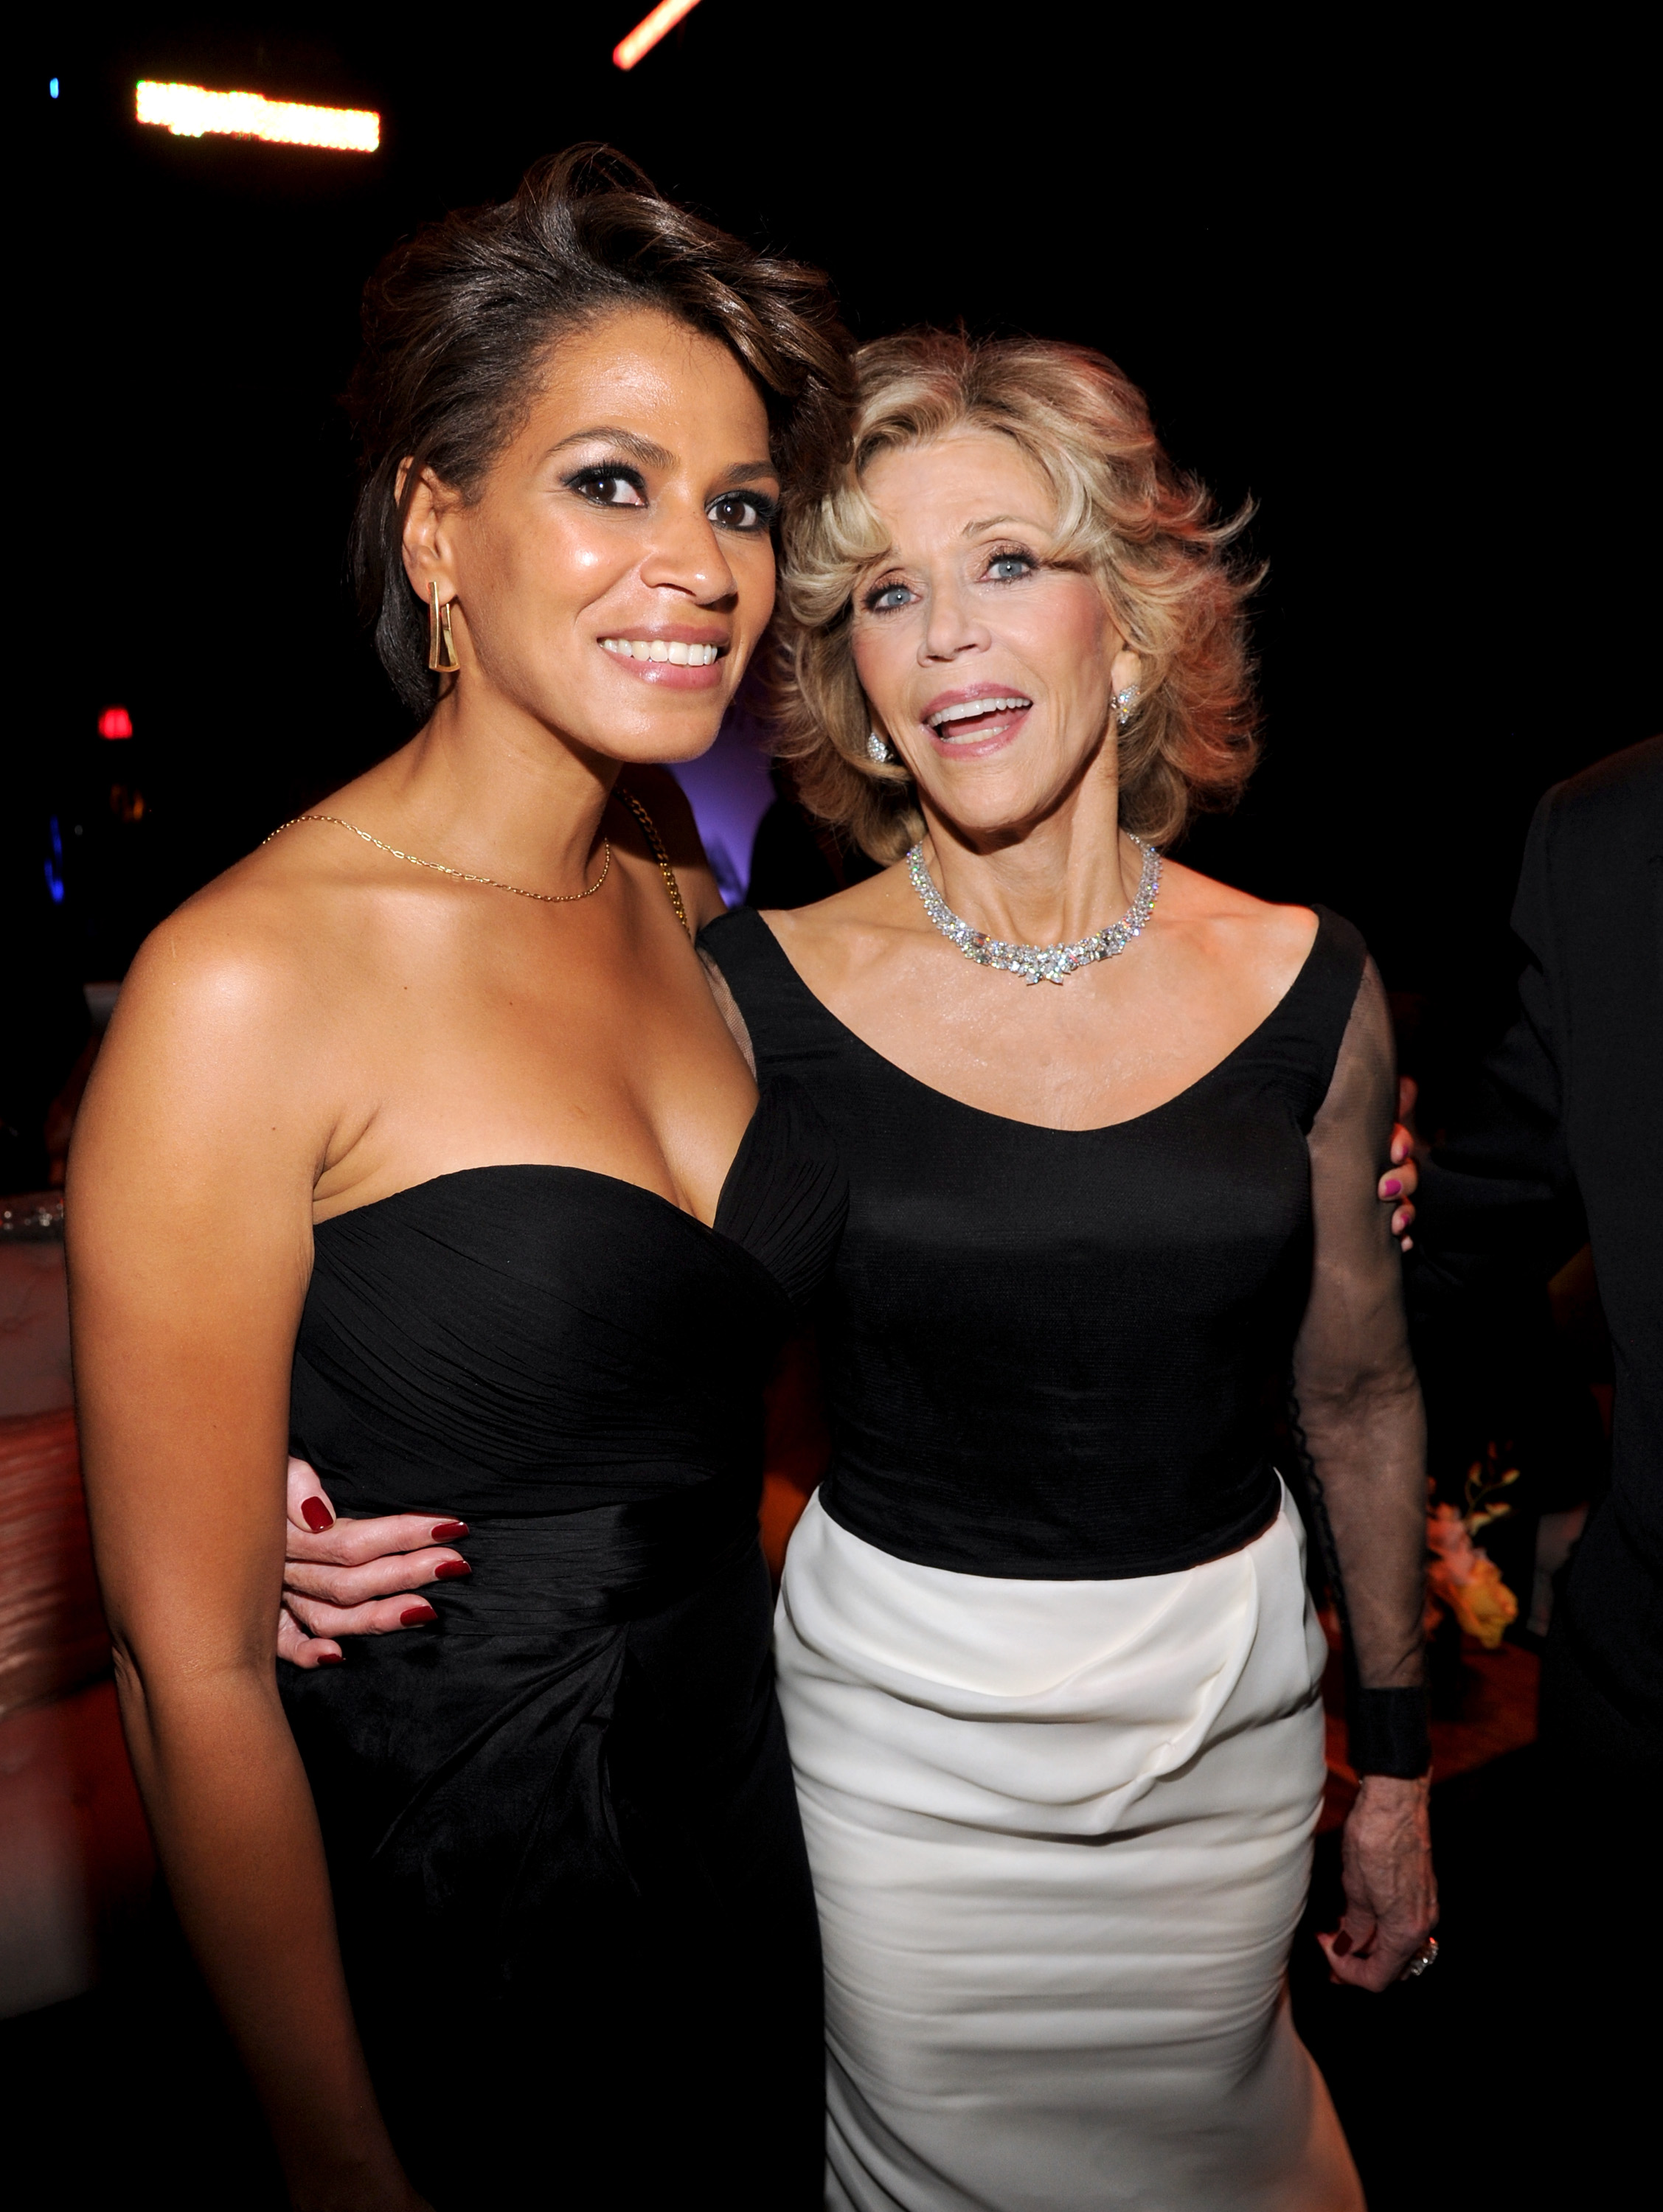 Simone Bent and Jane Fonda during the 2014 AFI Life Achievement Award: A Tribute to Jane Fonda after party at the Dolby Theatre on June 5, 2014, in Hollywood, California. | Source: Getty Images